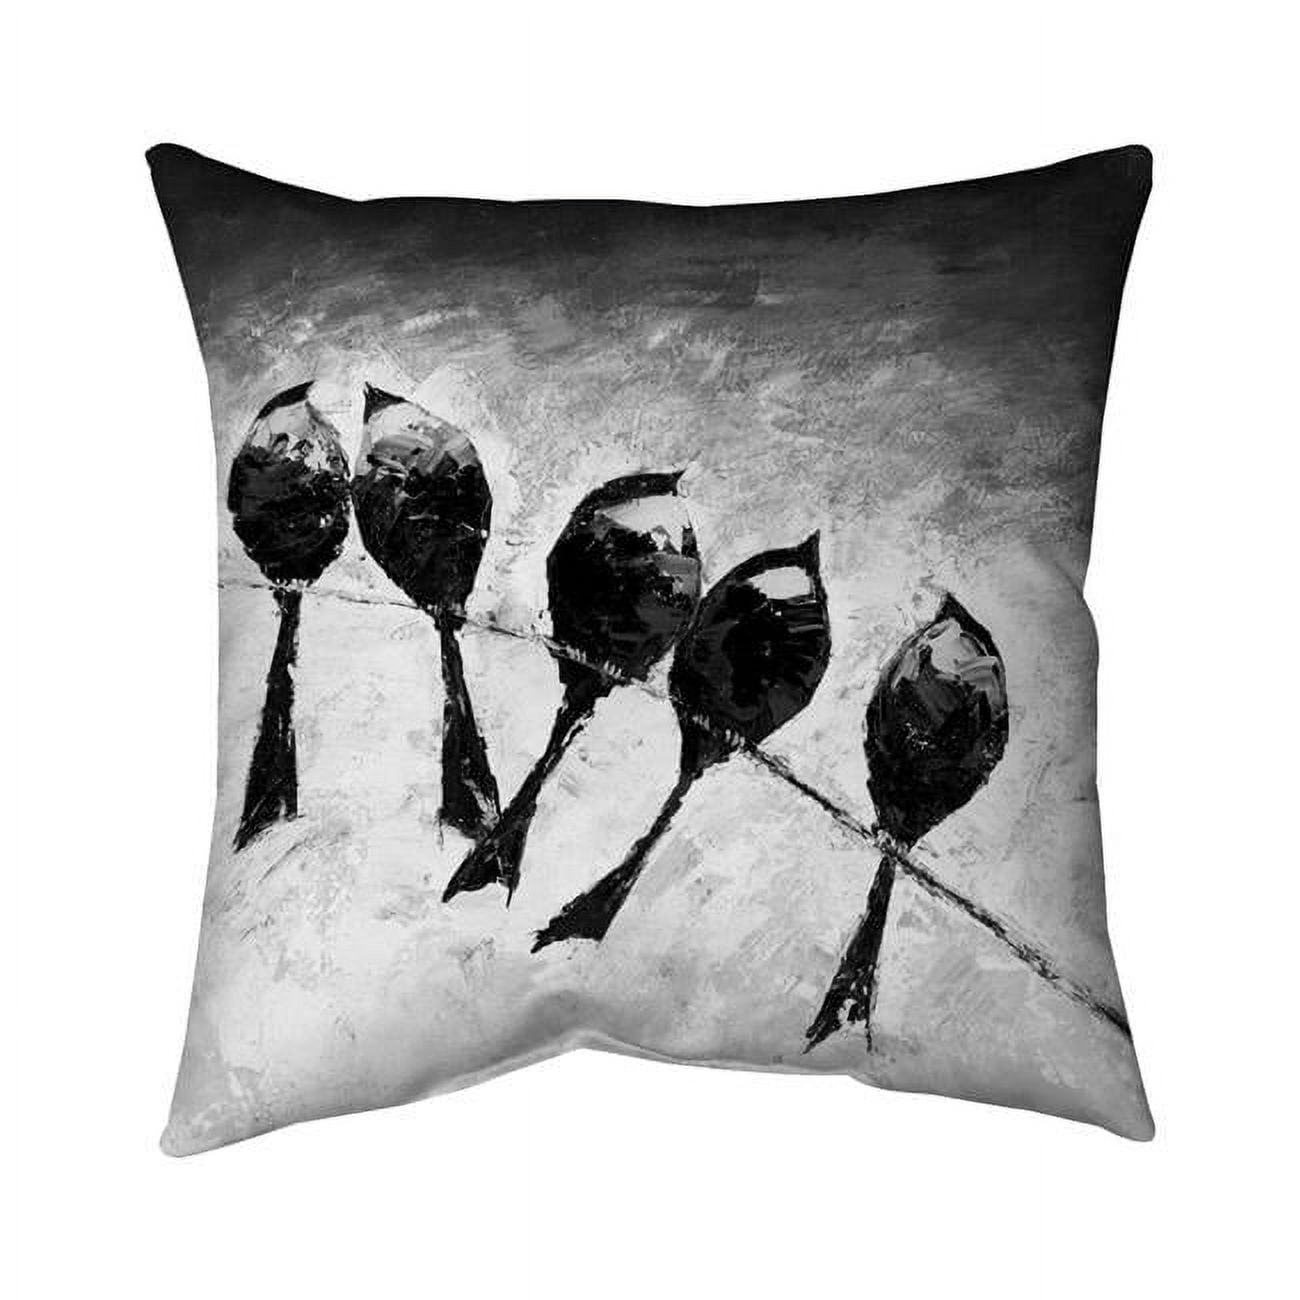 Begin Home Decor 5543-2020-AN115-1 20 x 20 in. Five Birds Perched-Double Sided Print Indoor Pillow Cover